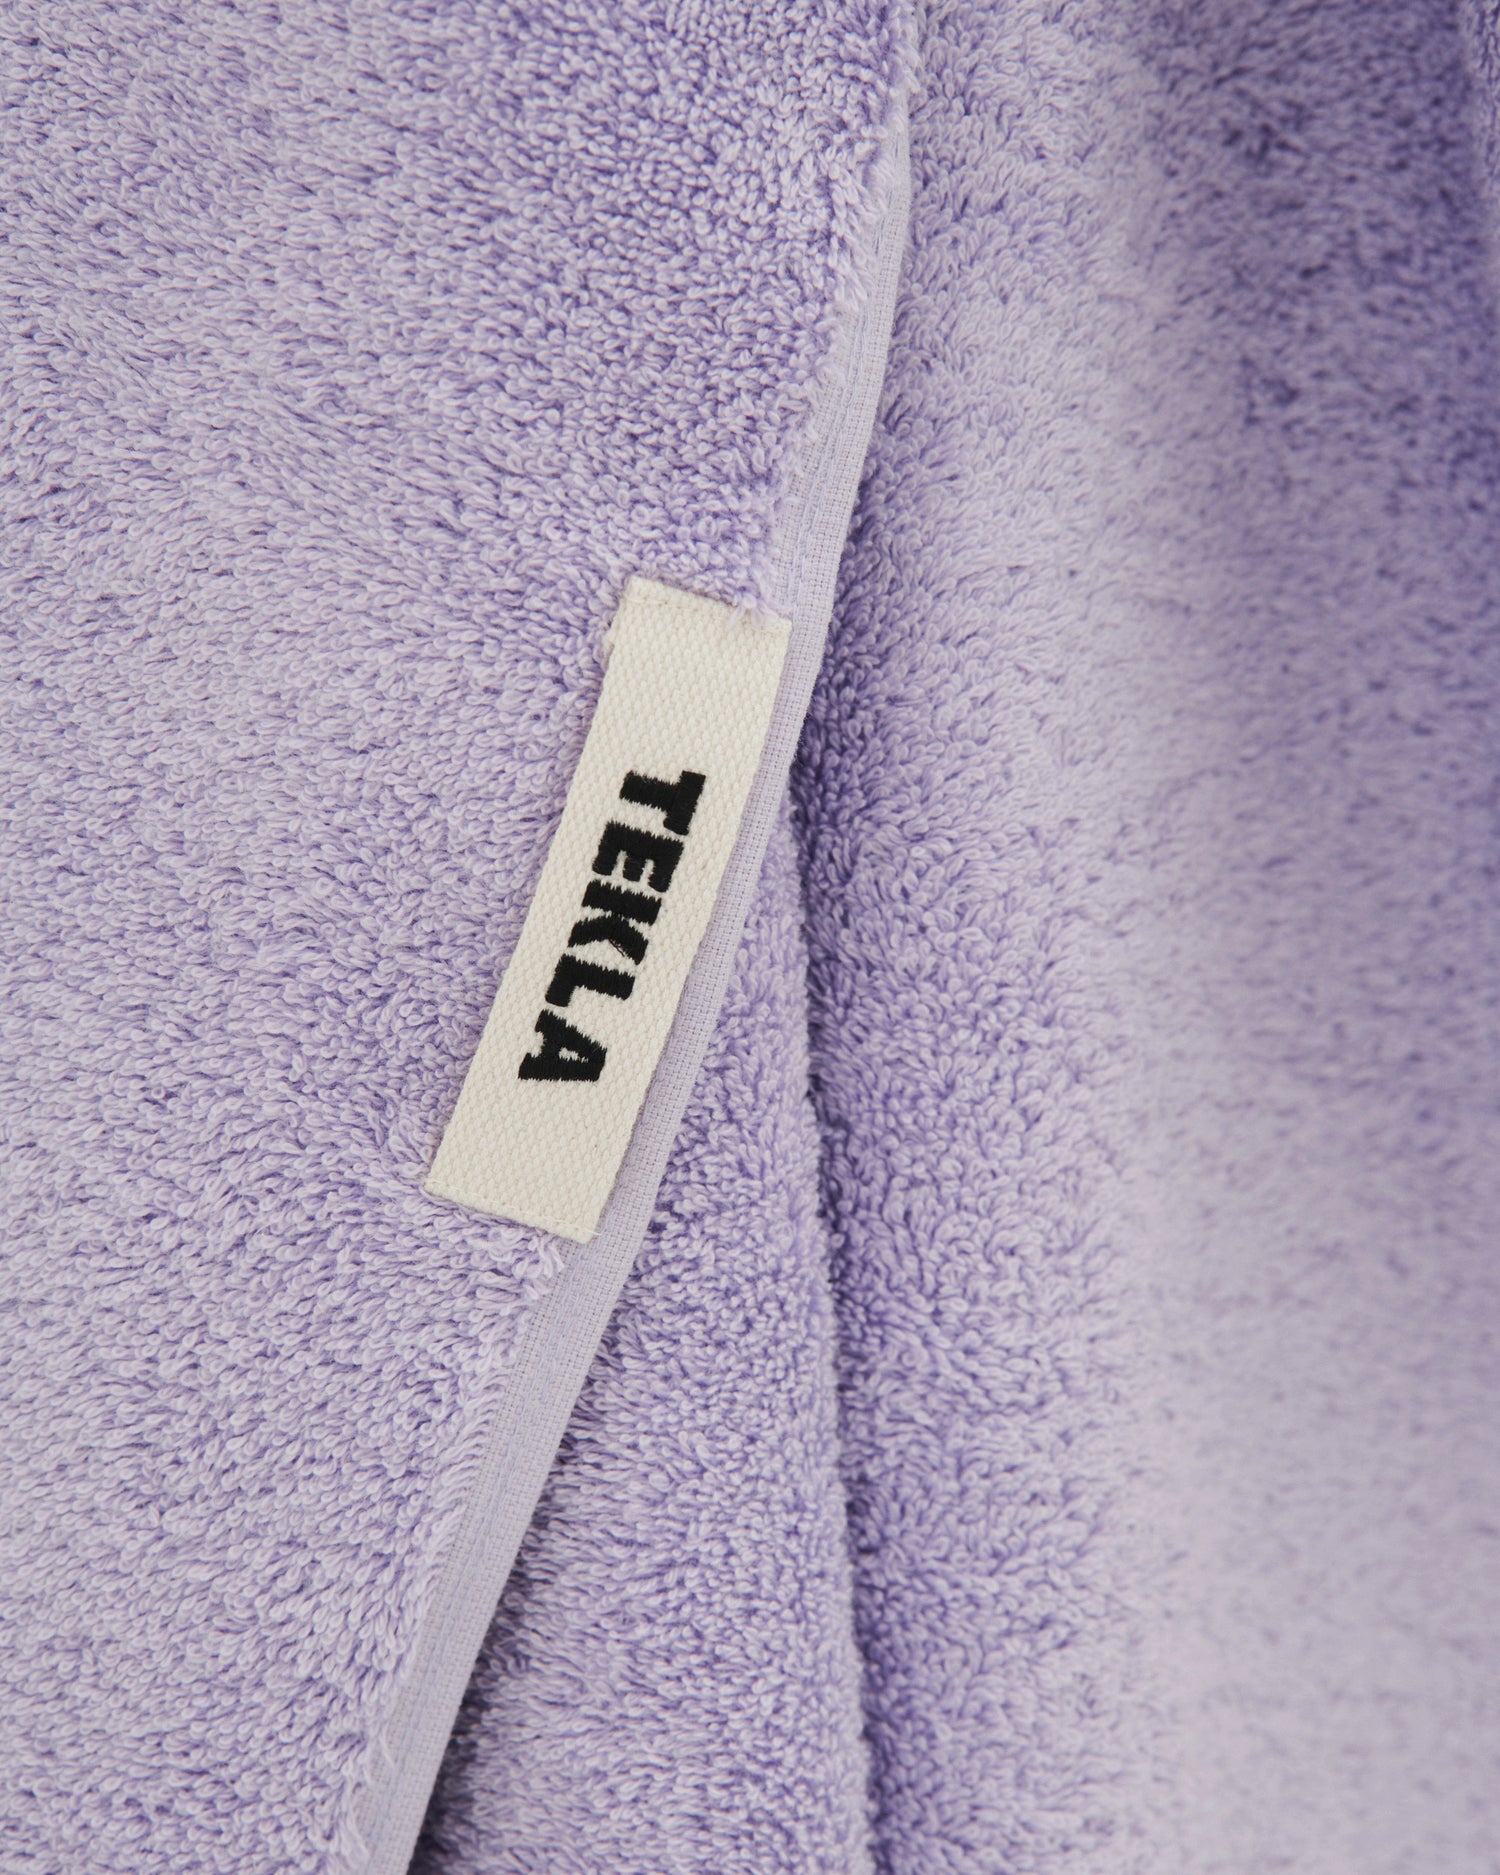 Terry Hand Towel - Solid, lavender